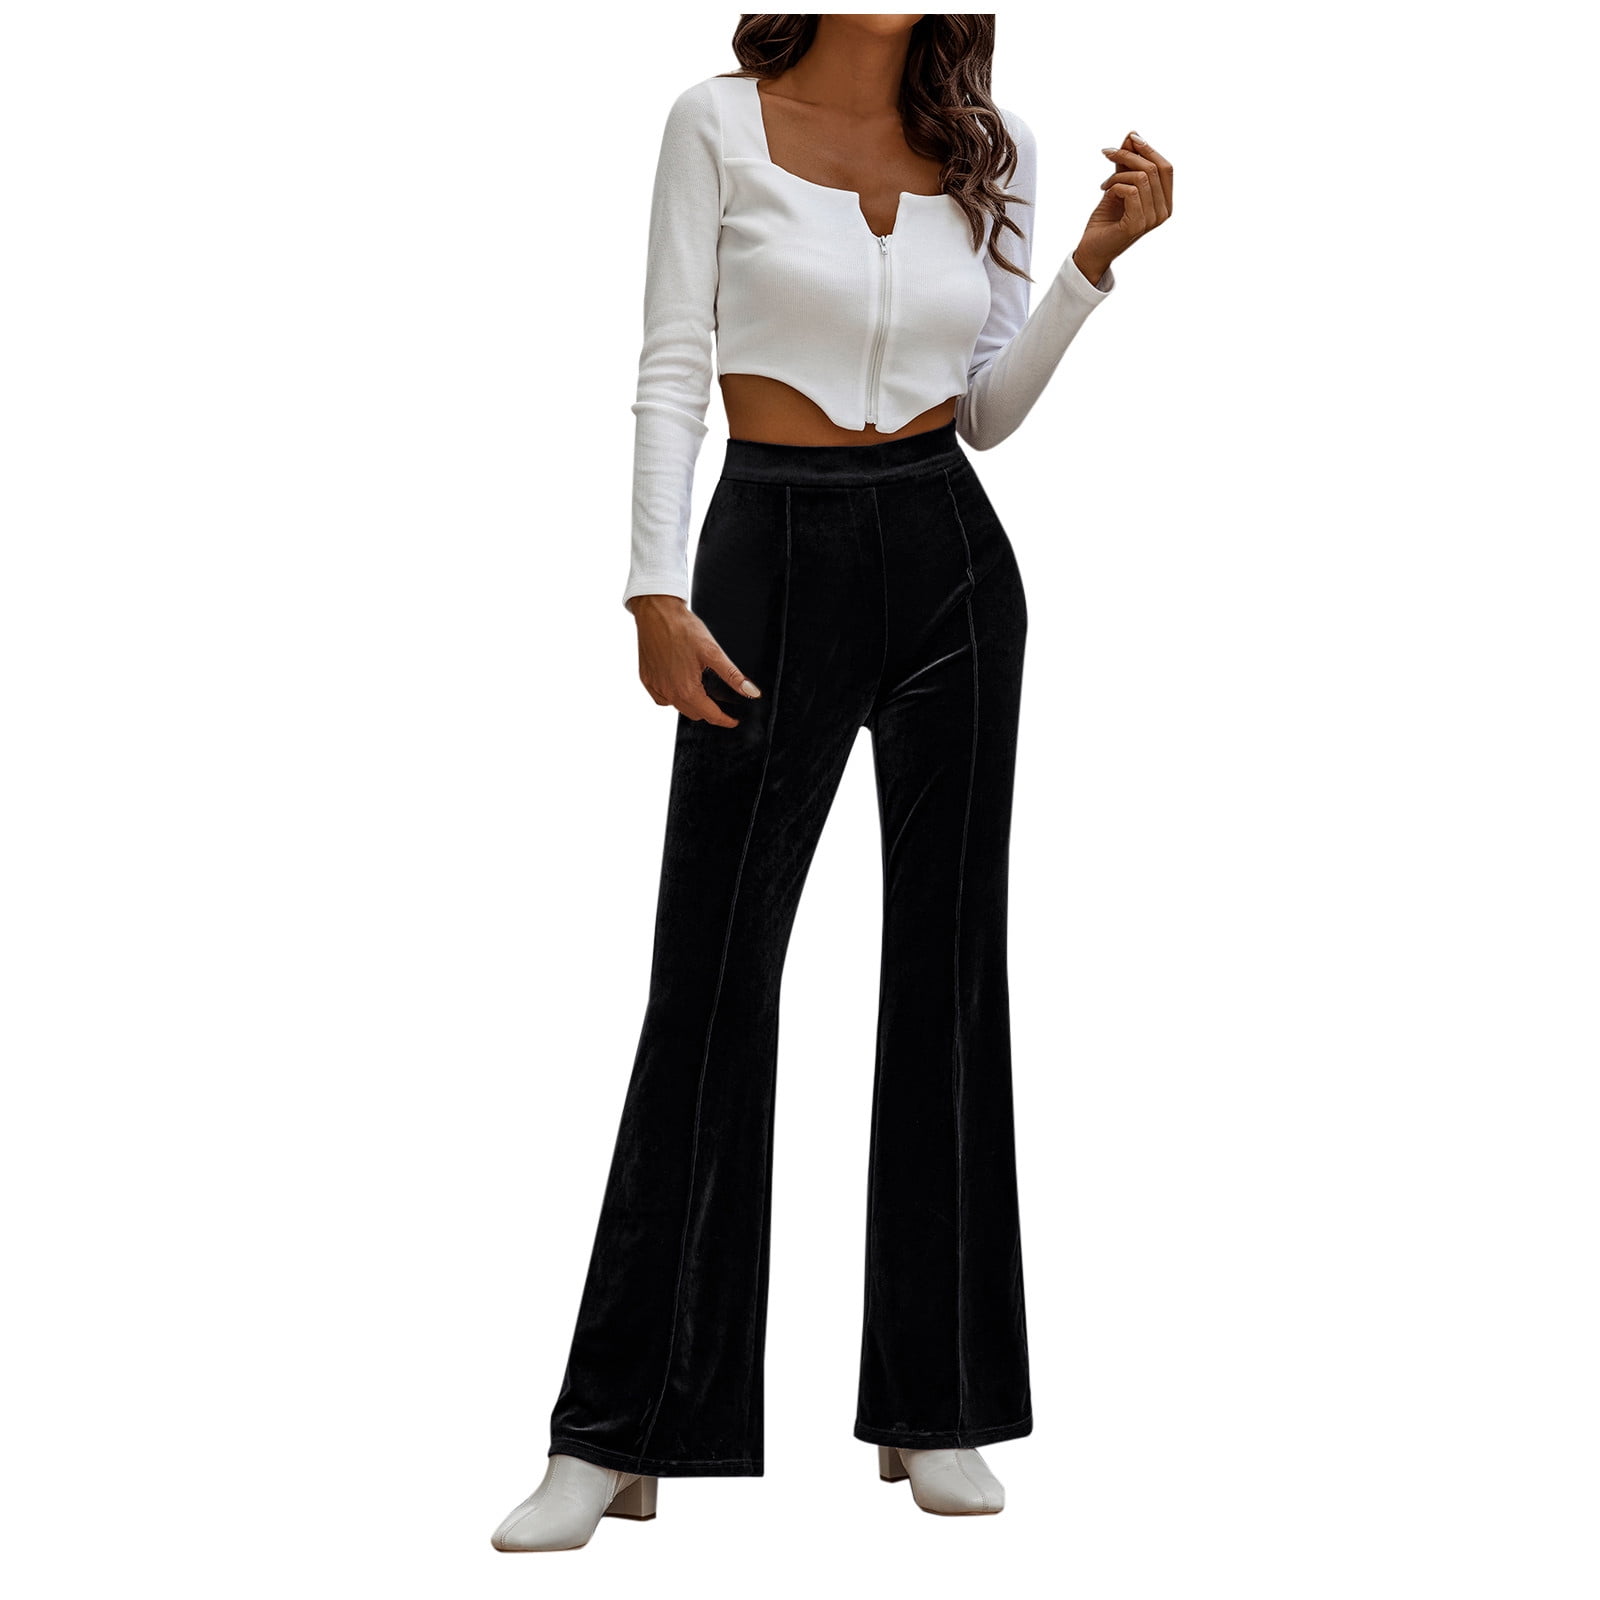 Hfyihgf High Waisted Velvet Flare Pants for Women Elastic Business Casual  Work Long Pants Solid Color Bell Bottom Trousers(Brown,XL)